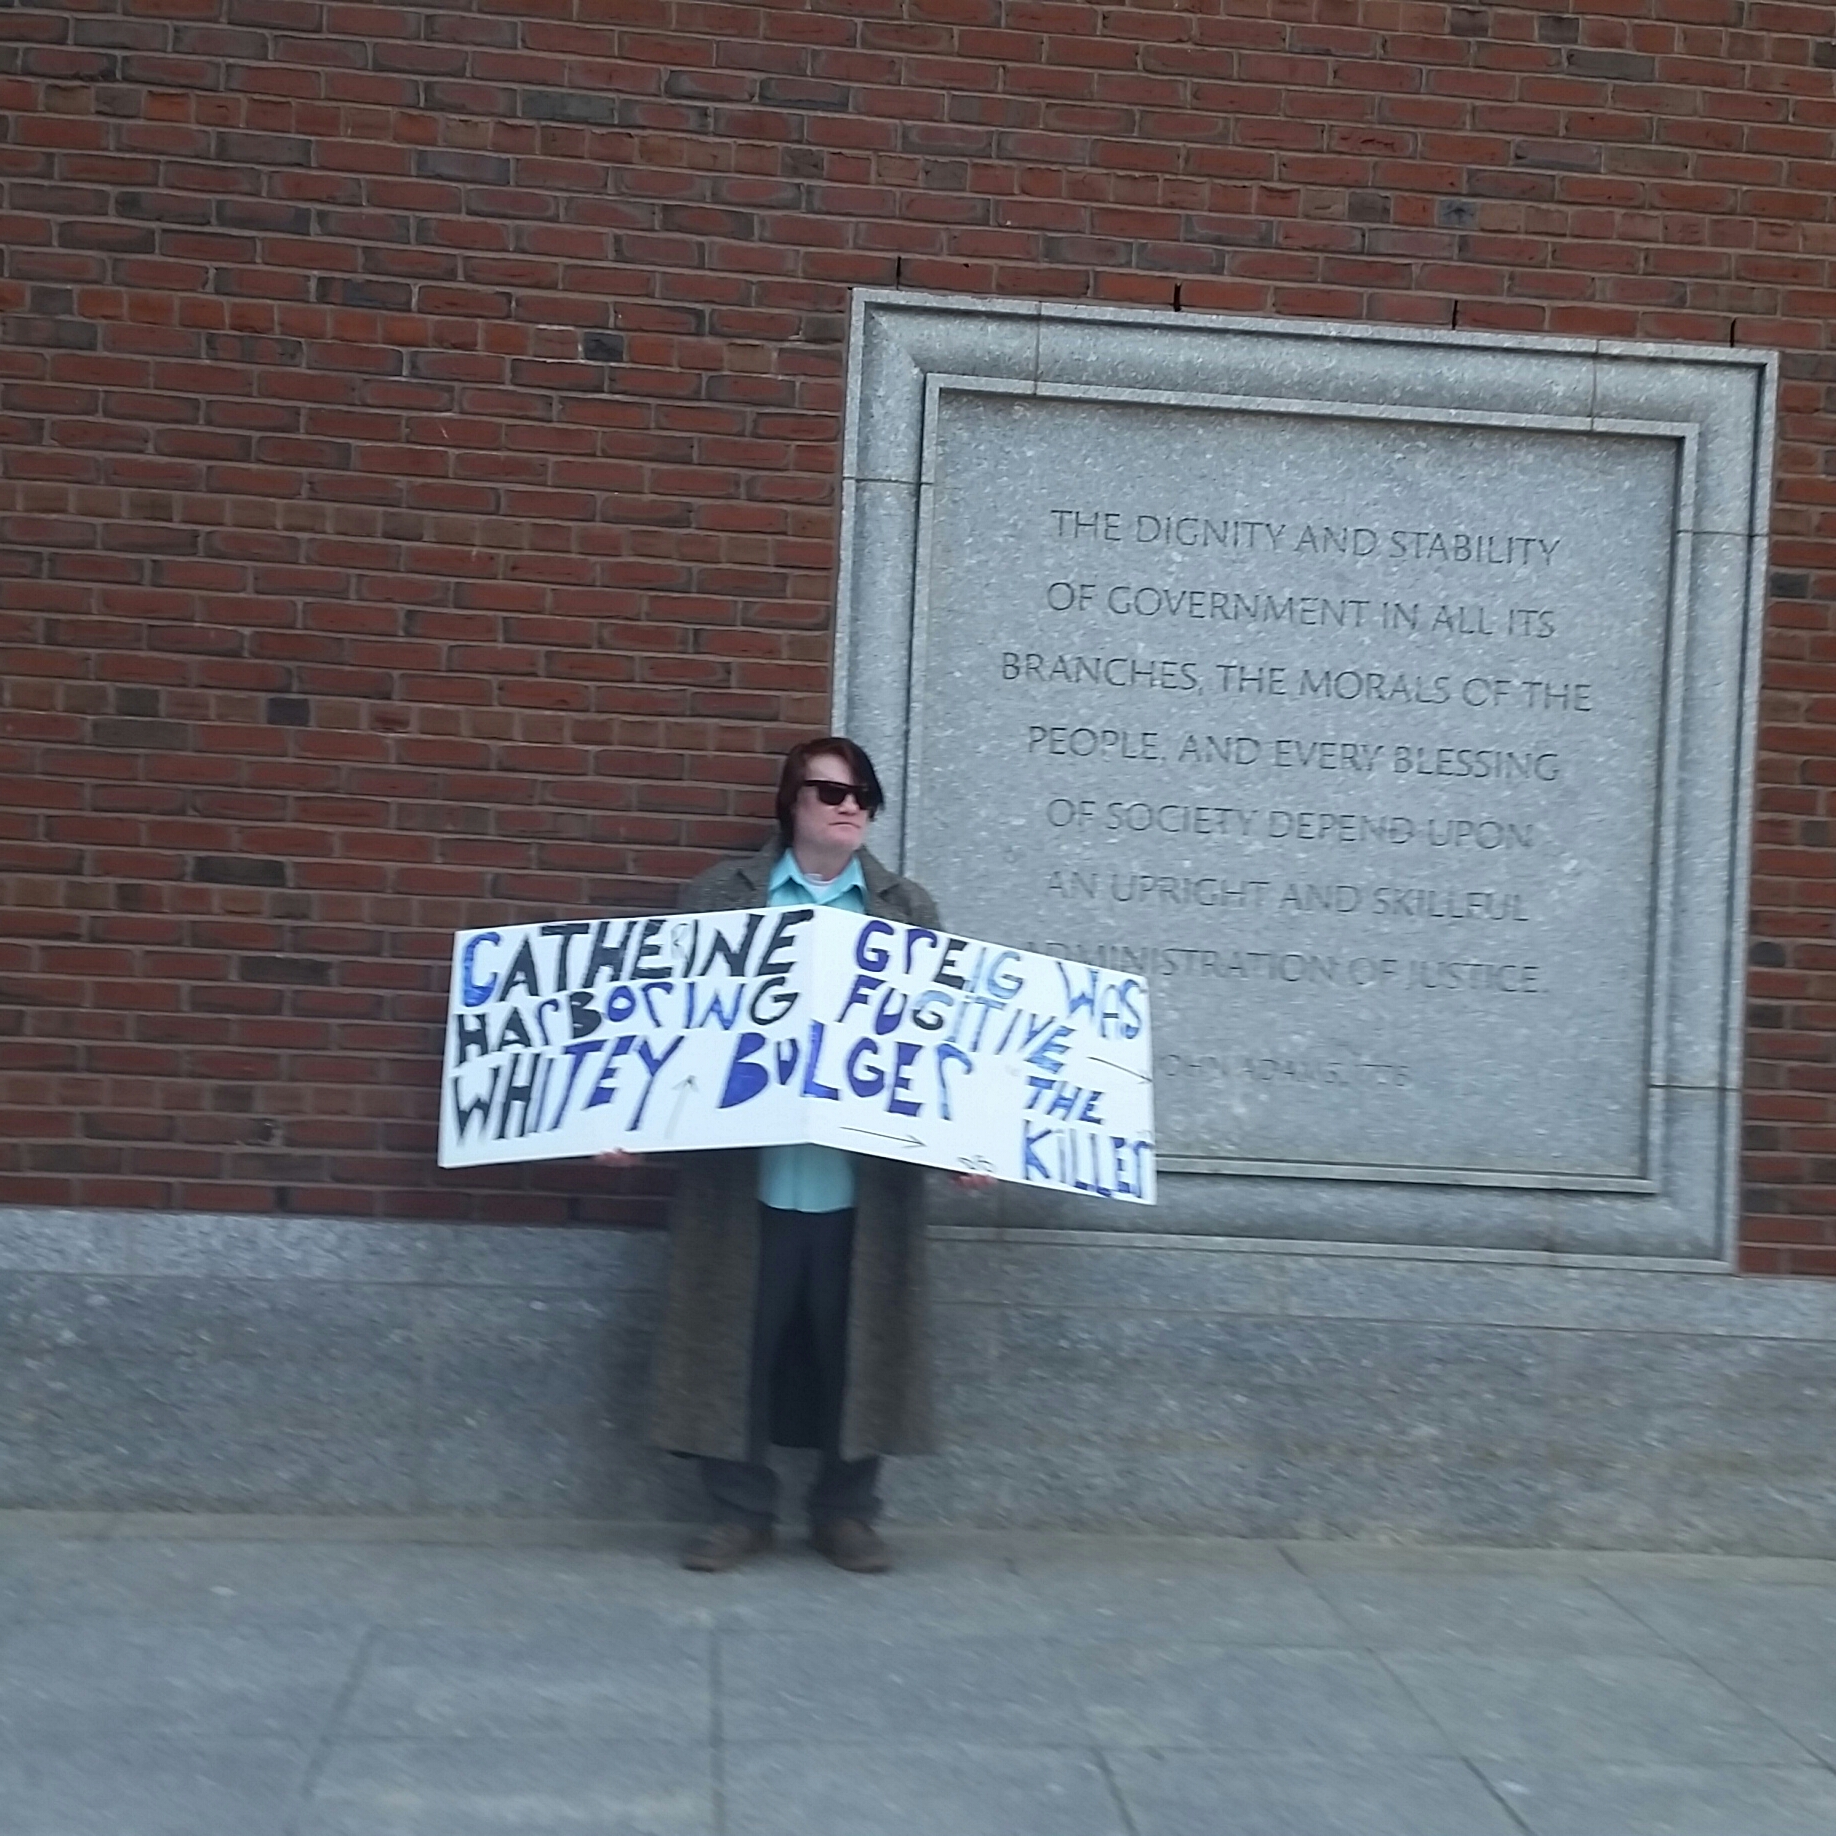 PHOTO: A protester stood outside the courthouse in South Boston , where Whitey Bulger's longtime girlfriend, Catherine Greig, was sentenced to an additional 21 months in prison.